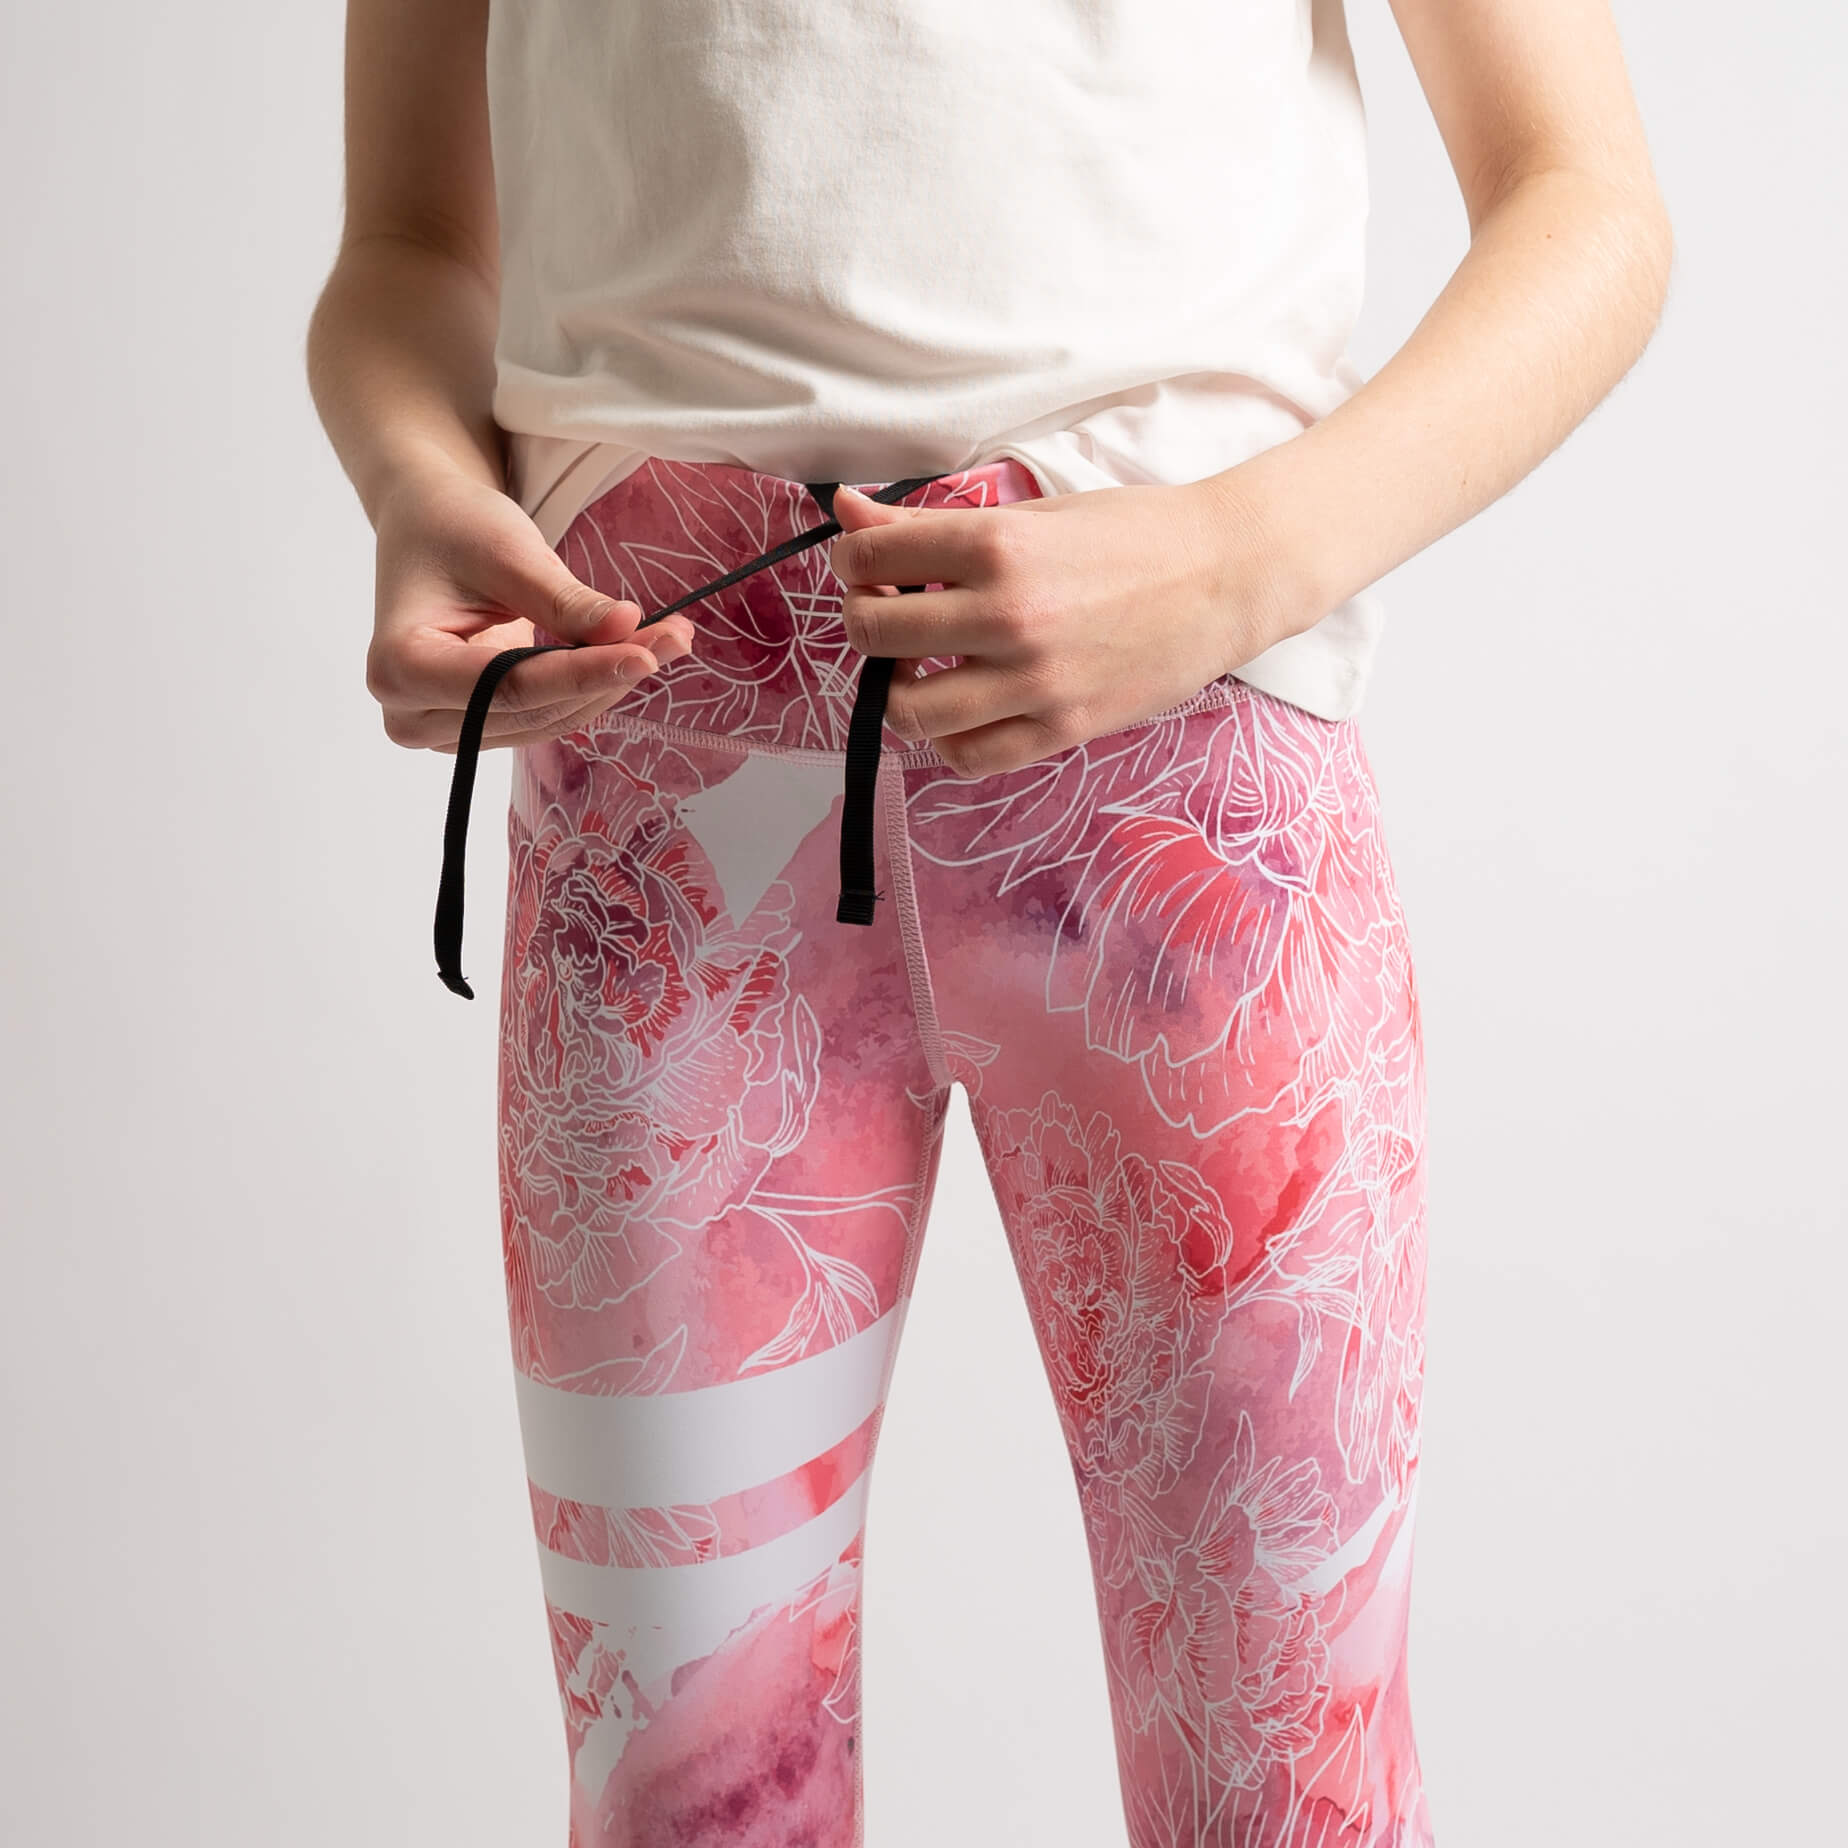 Discover more than 167 are leggings unisex best